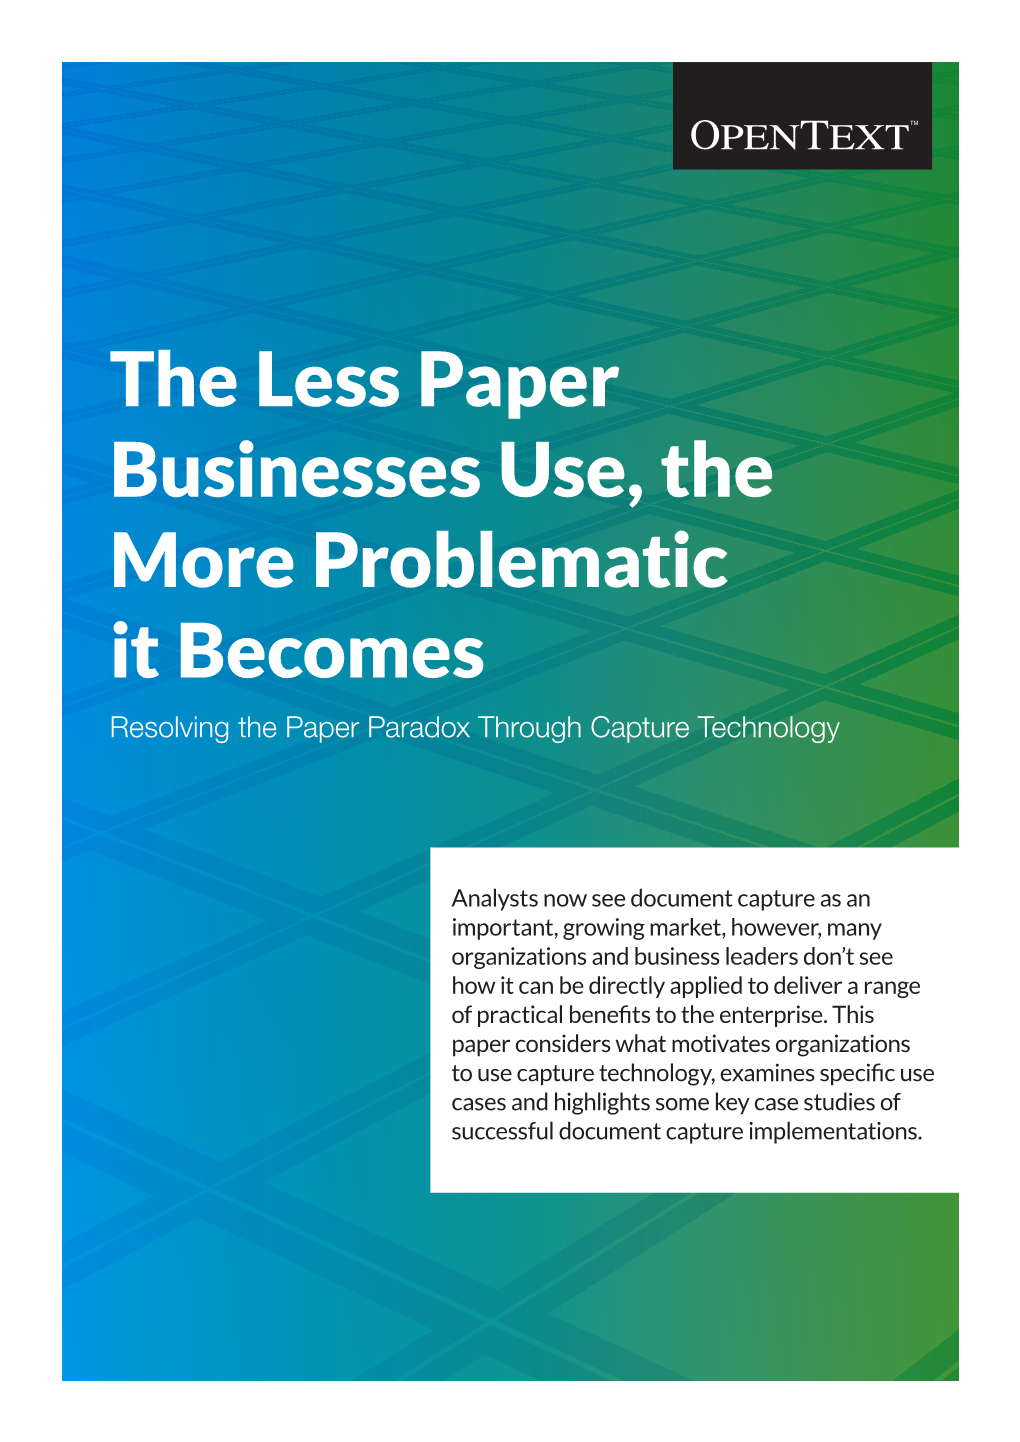 The Less Paper Businesses Use, the More Problematic It Becomes Resolving the Paper Paradox Through Capture Technology